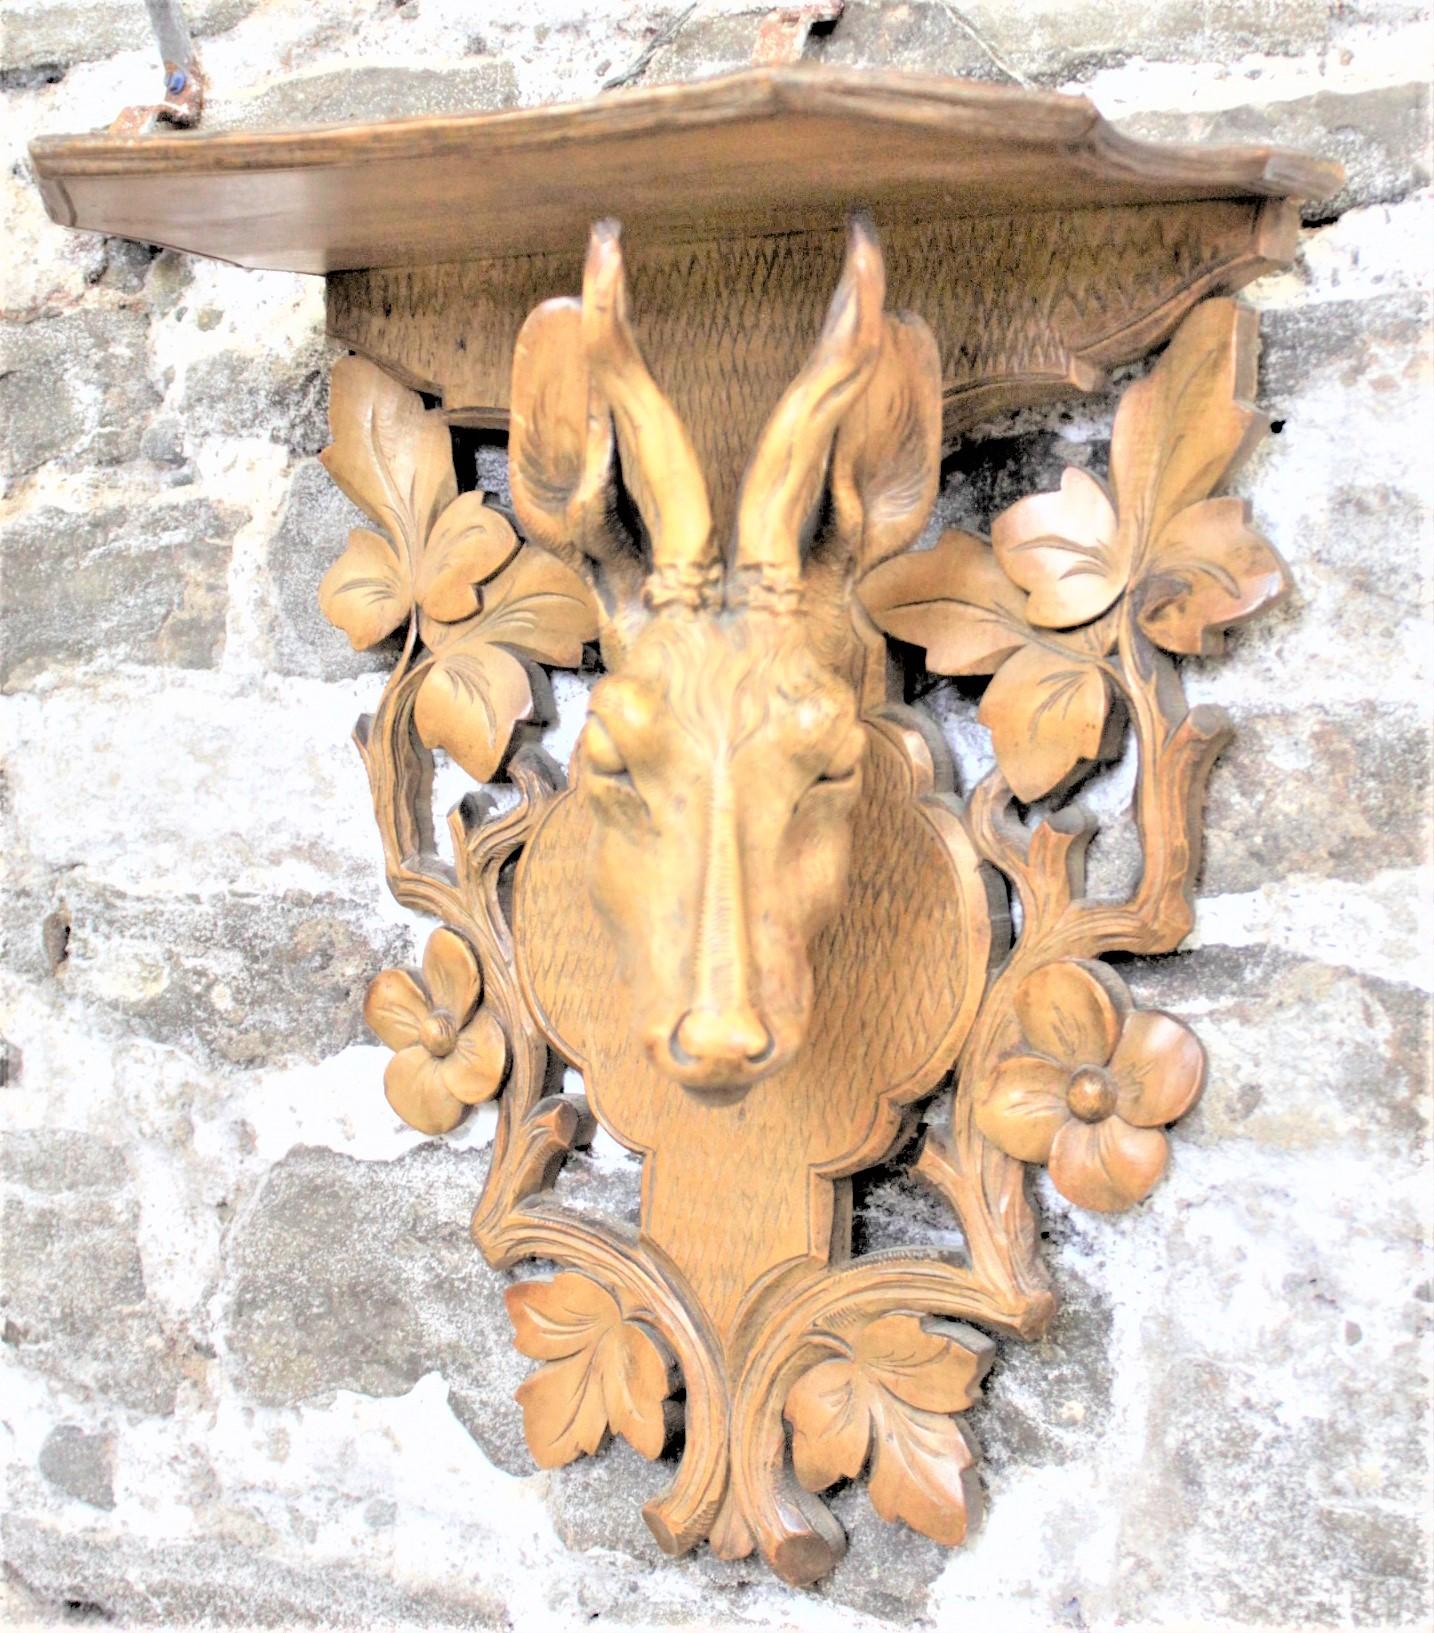 This very ornately hand carved wall shelf was made in Europe, and most likely Germany, in approximately 1900 in the Black Forest style. The shelf is composed of a softwood and features a large and detailed hand carved red deer head mounted to a back